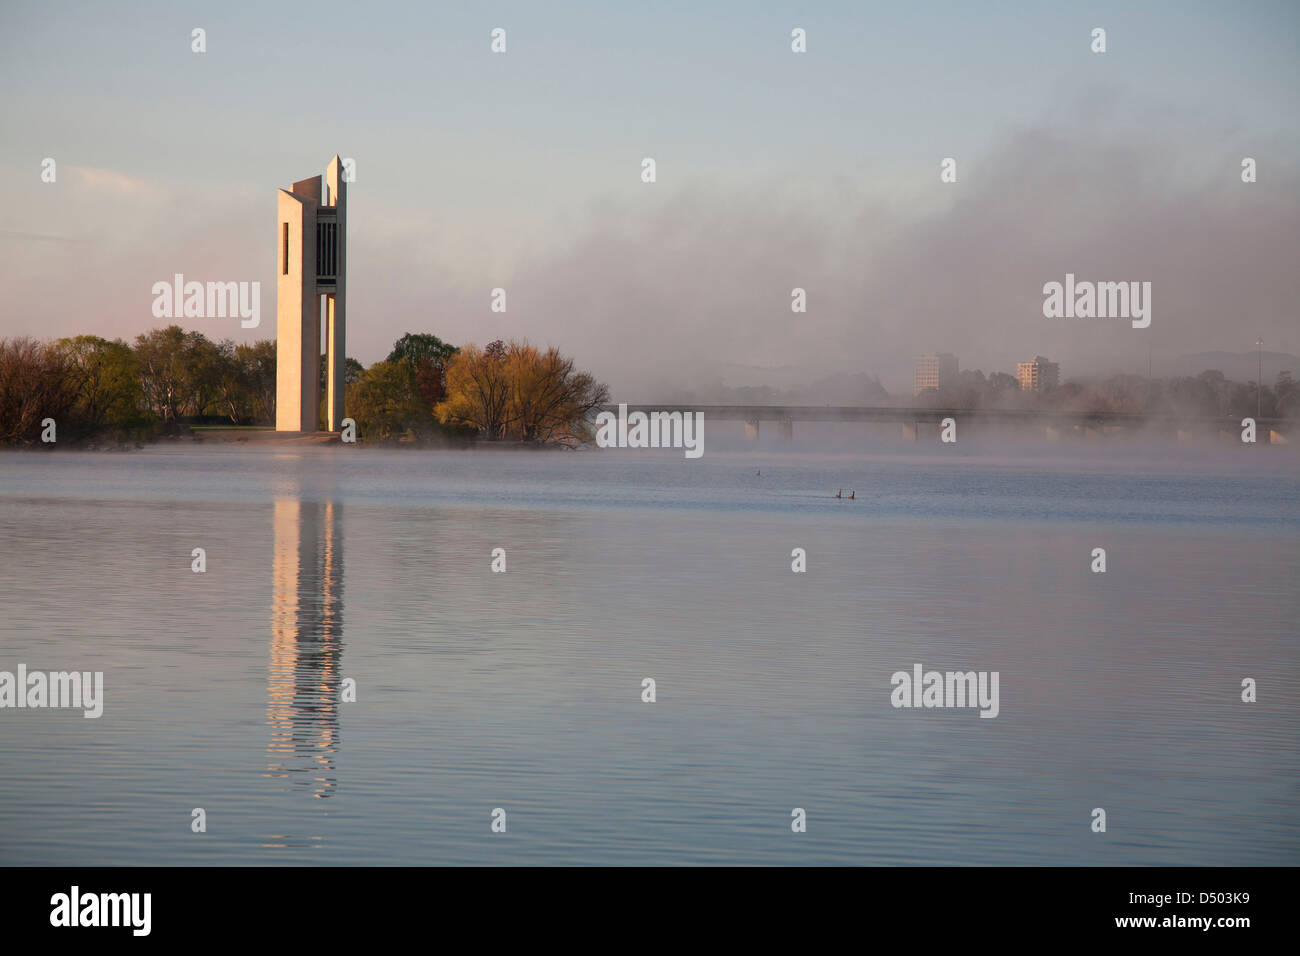 The National Carillon on Lake Burley Griffin in the early-morning light Canberra ACT Australia Stock Photo